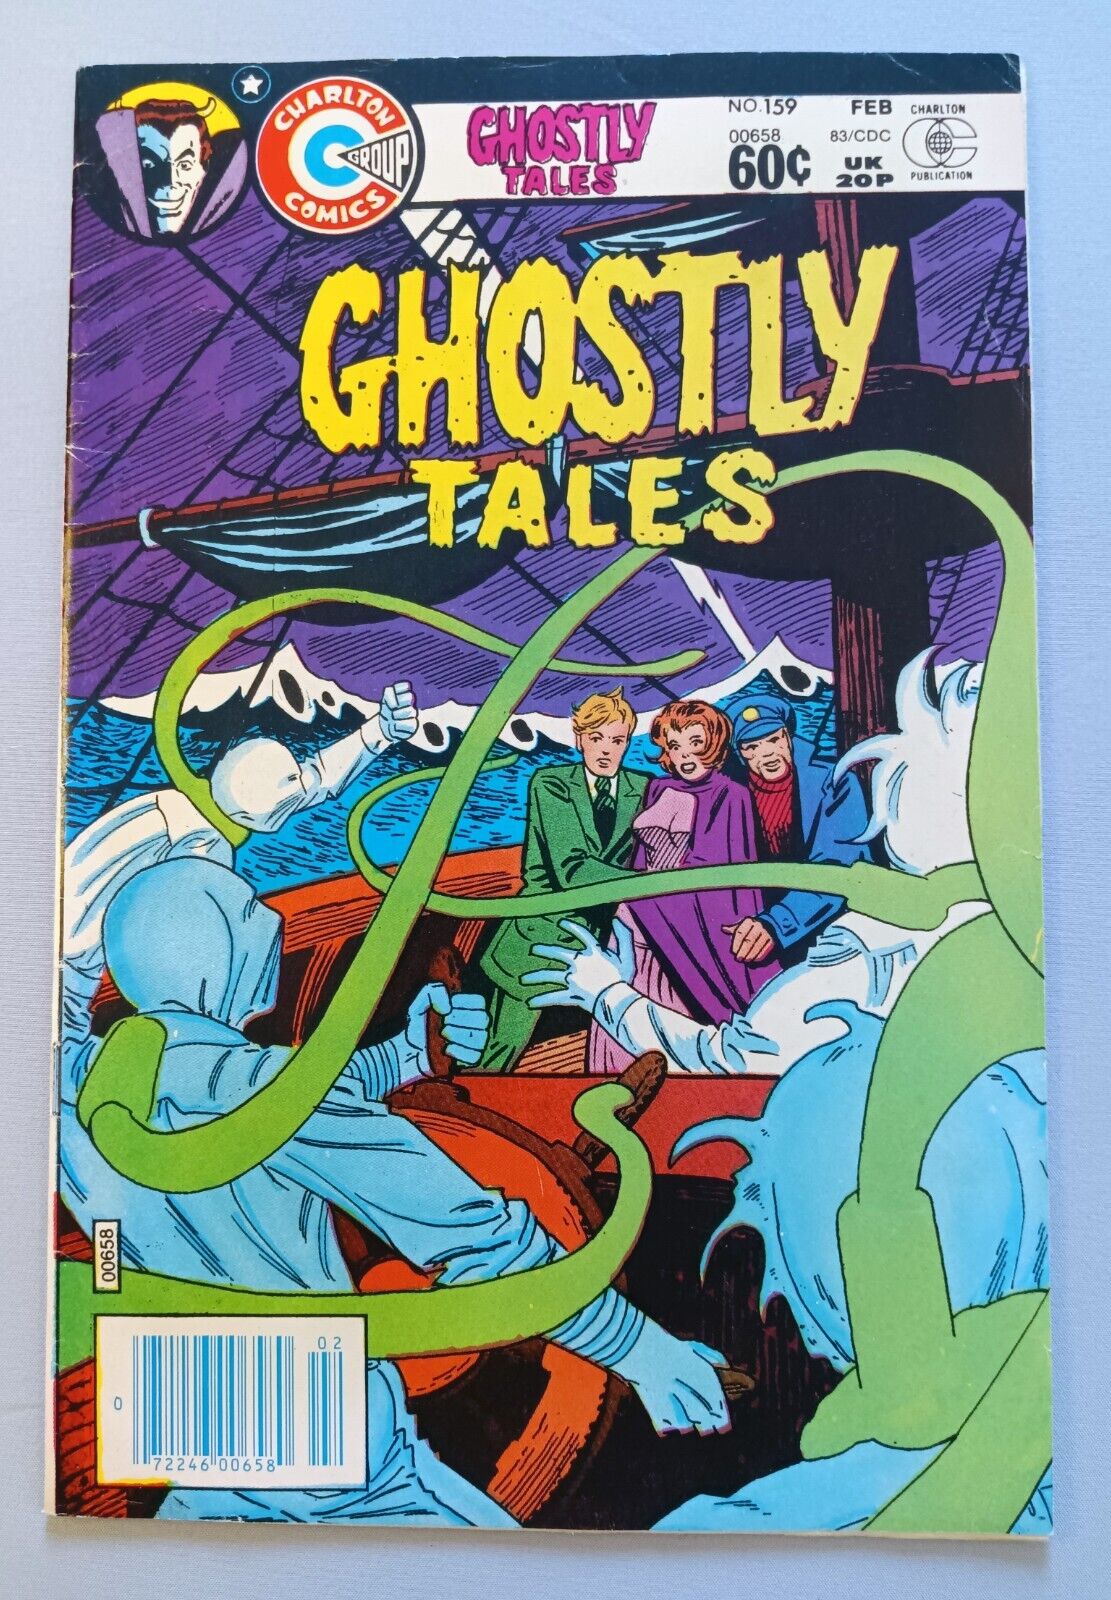 GHOSTLY TALES #159, CHARLTON COMICS, BRONZE AGE, VG-FN, 1983